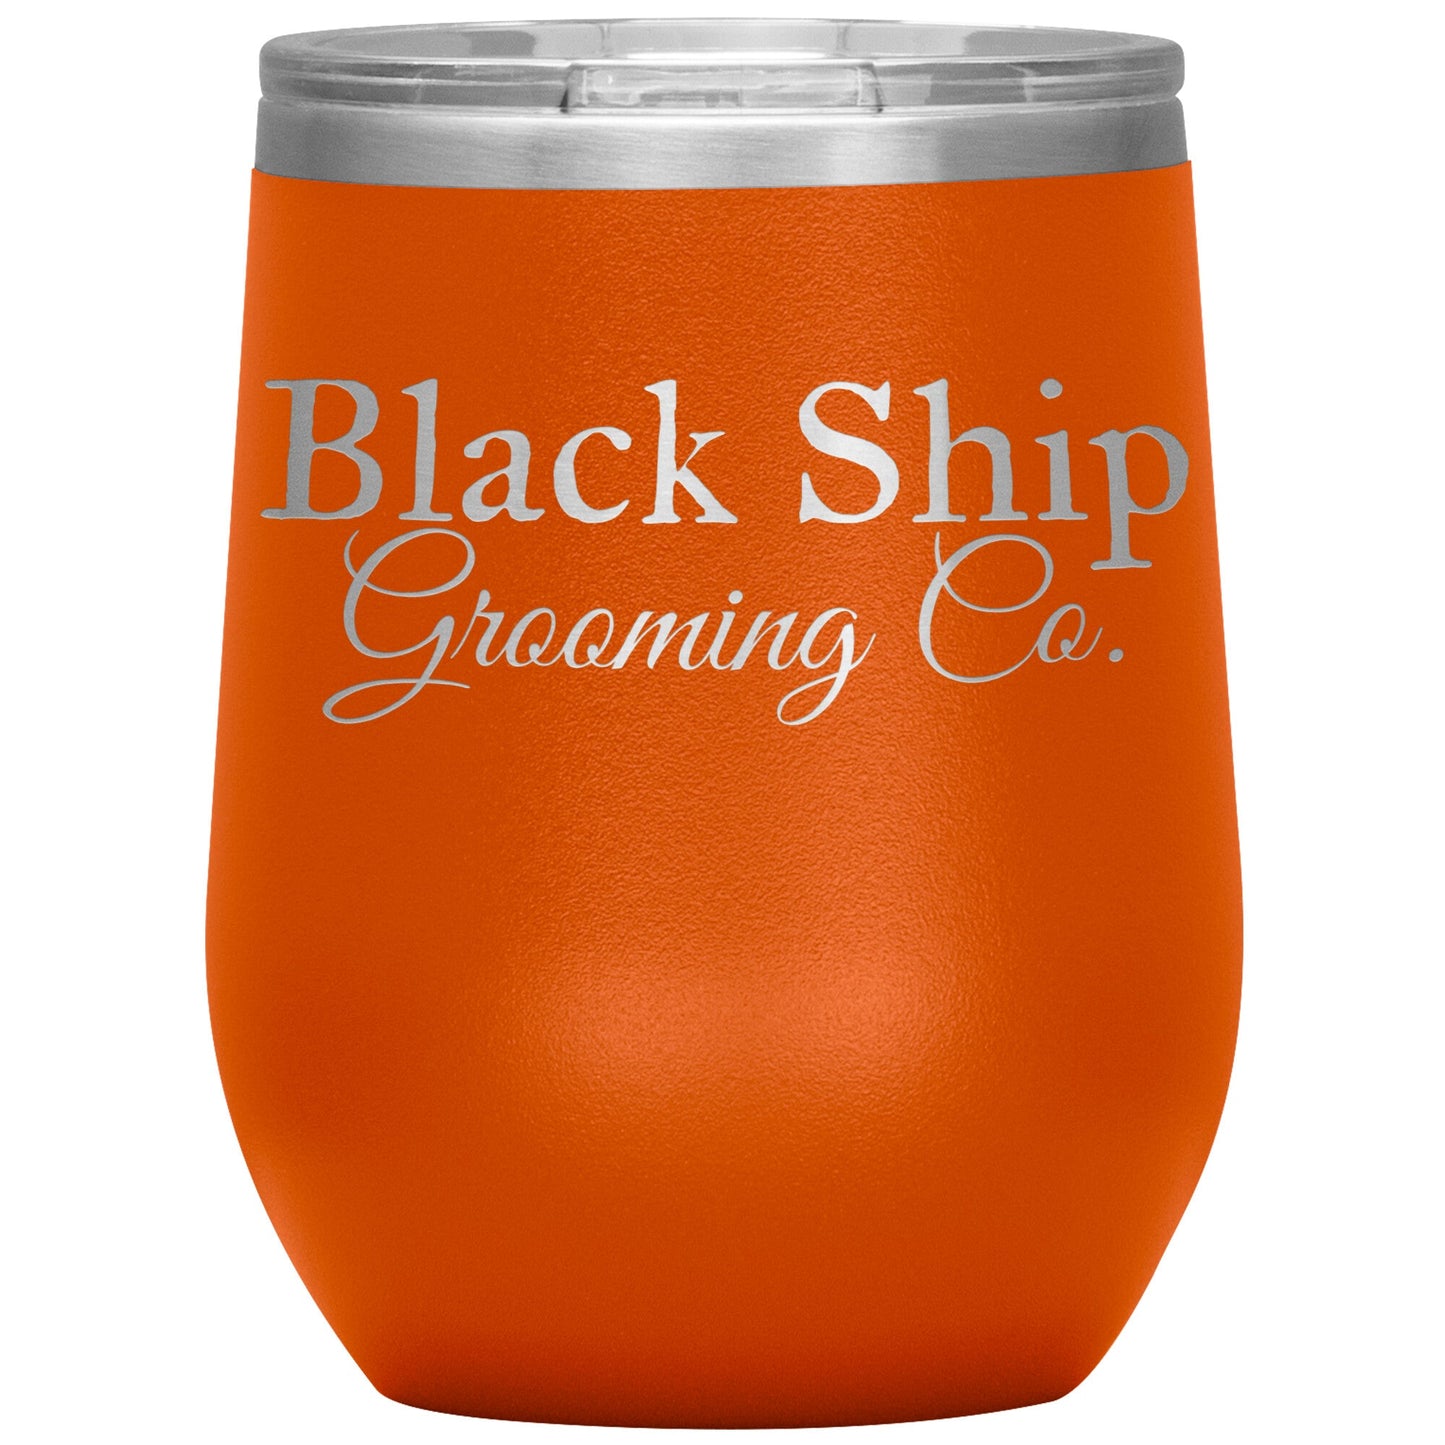 Load image into Gallery viewer, Black Ship Grooming Co. 12oz Insulated Wine Tumbler - Black Ship Grooming Co.
